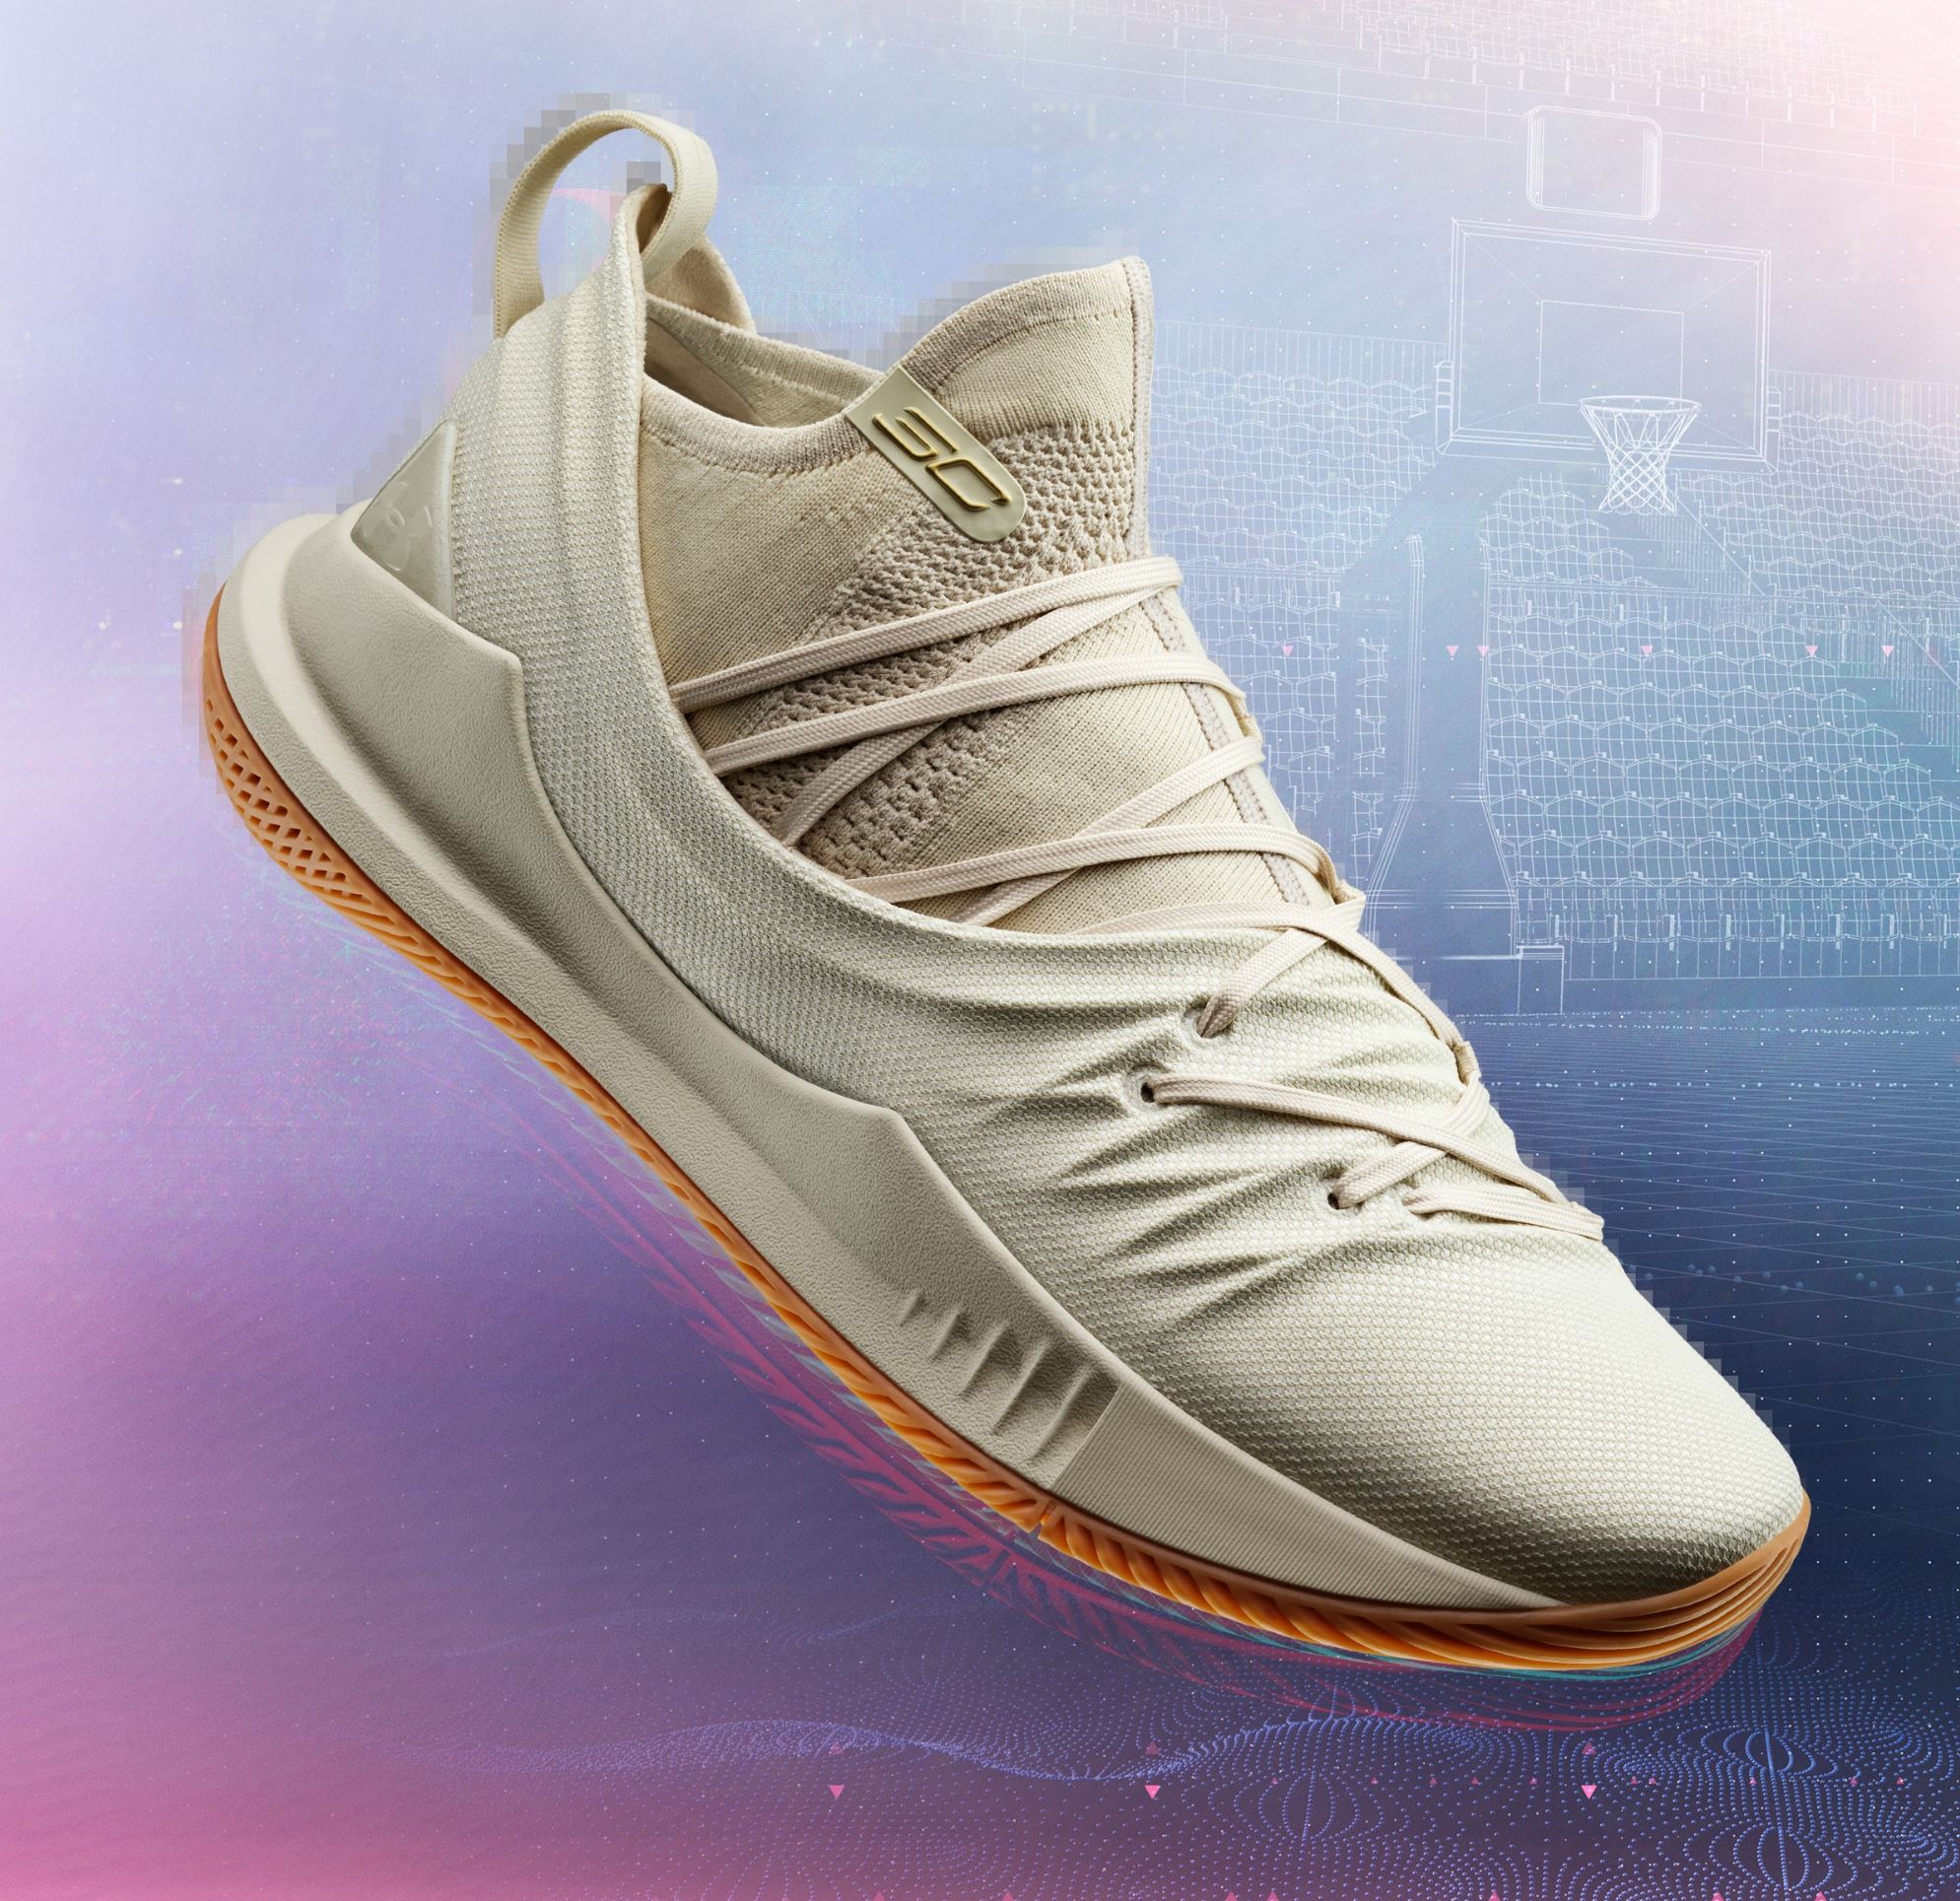 under armour curry 5 tan 2018 Stephen Curry asia tour